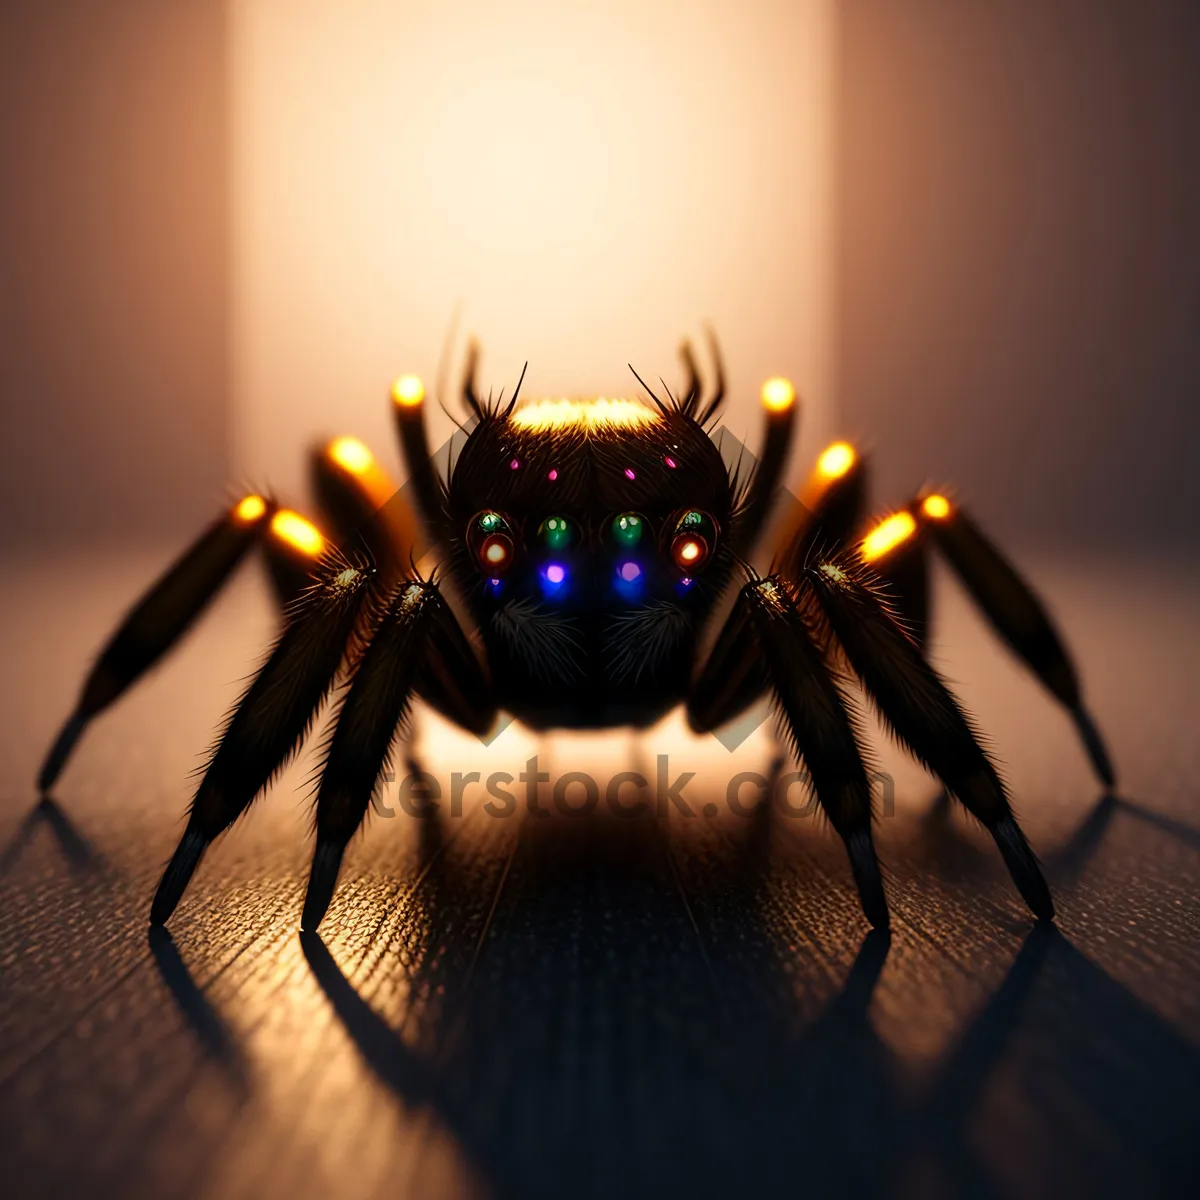 Picture of Black Widow Chandelier with Candlelight Glow